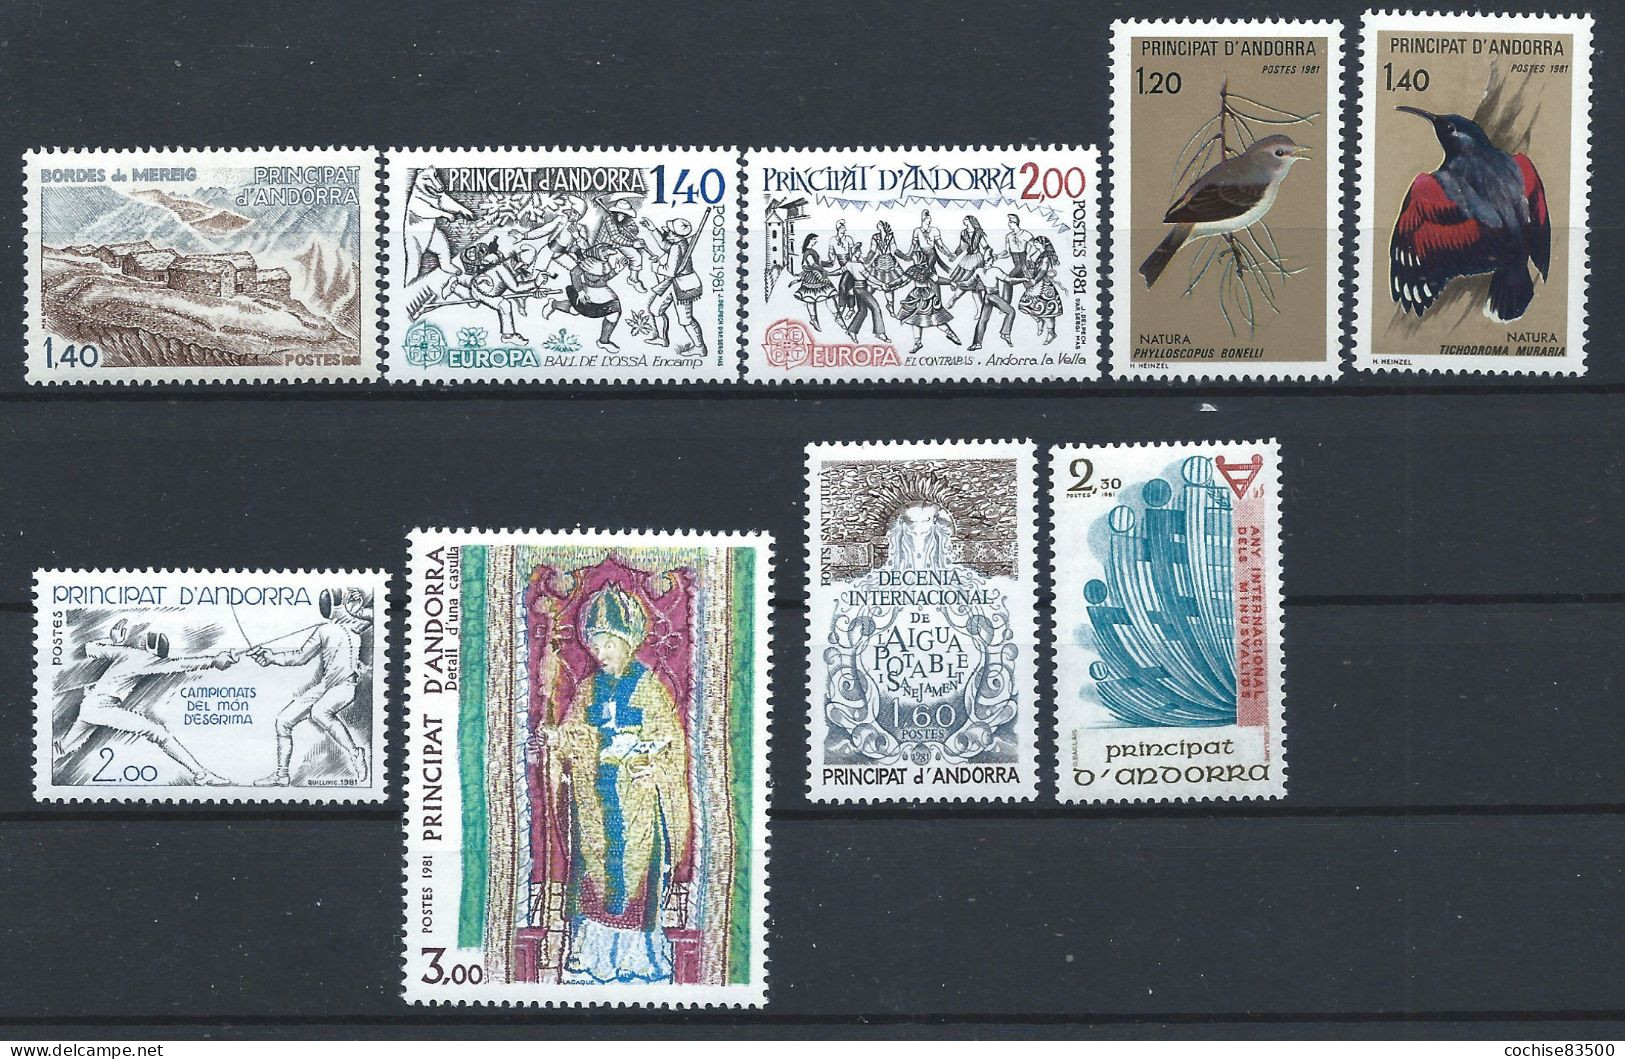 Andorre Lot 9 Tp Neuf** (MNH) Année 1981 - Annate Complete